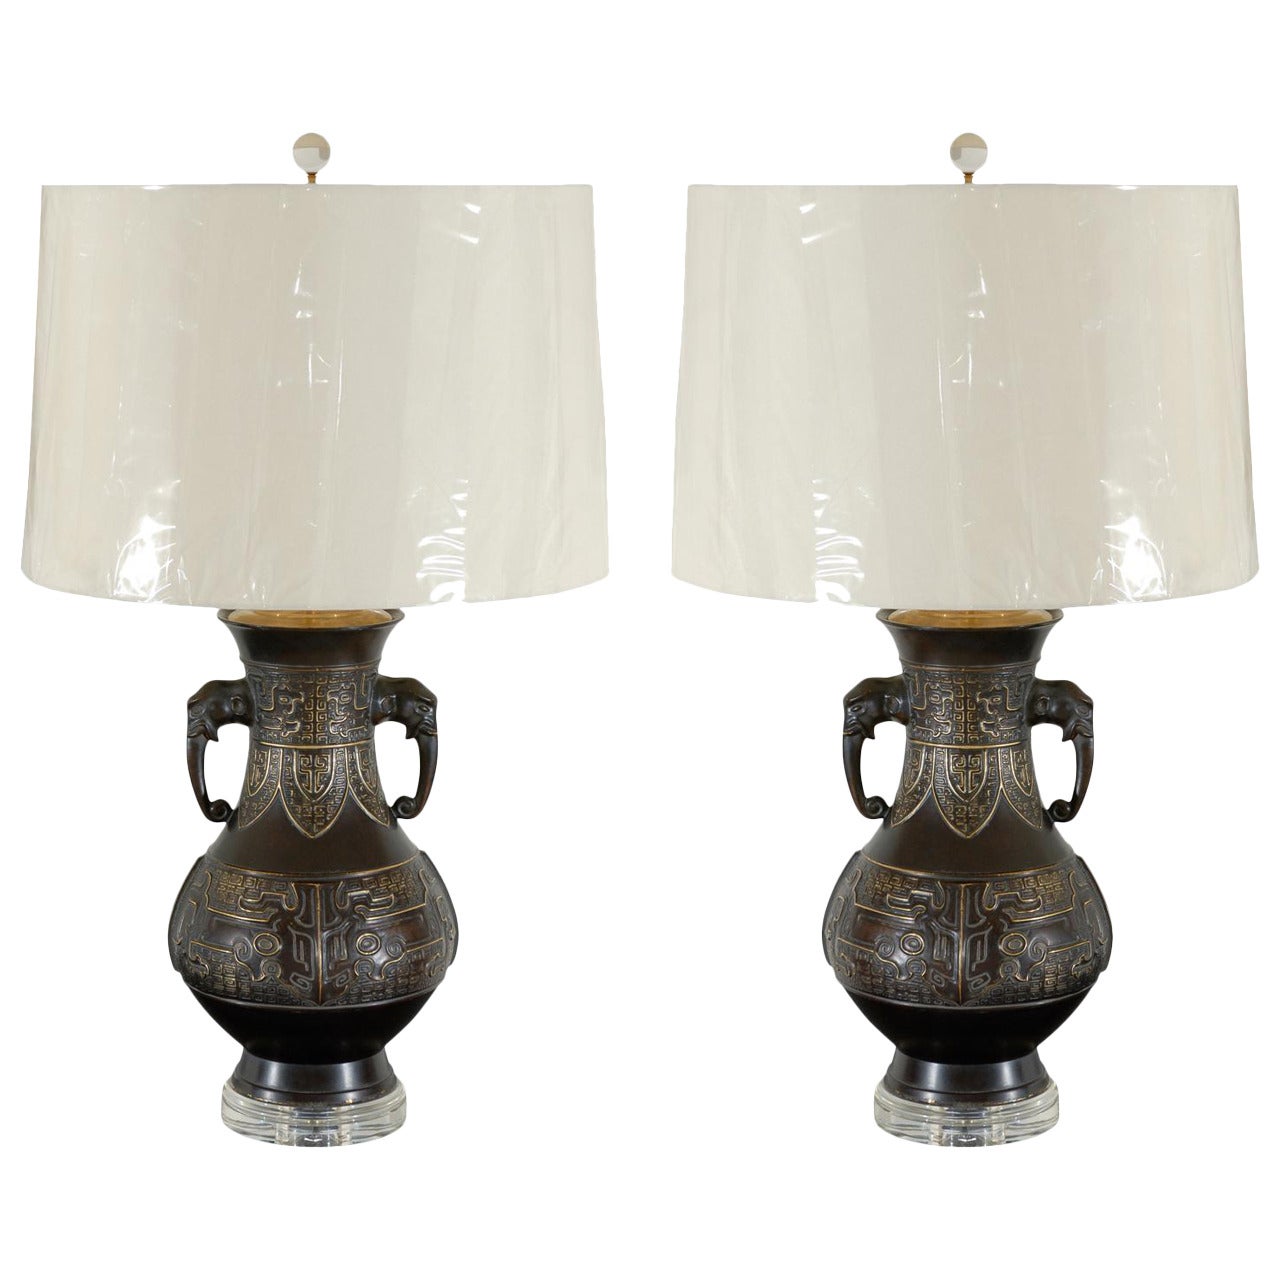 Exceptional Pair of Cast Urn Lamps with Elephant Head Detail